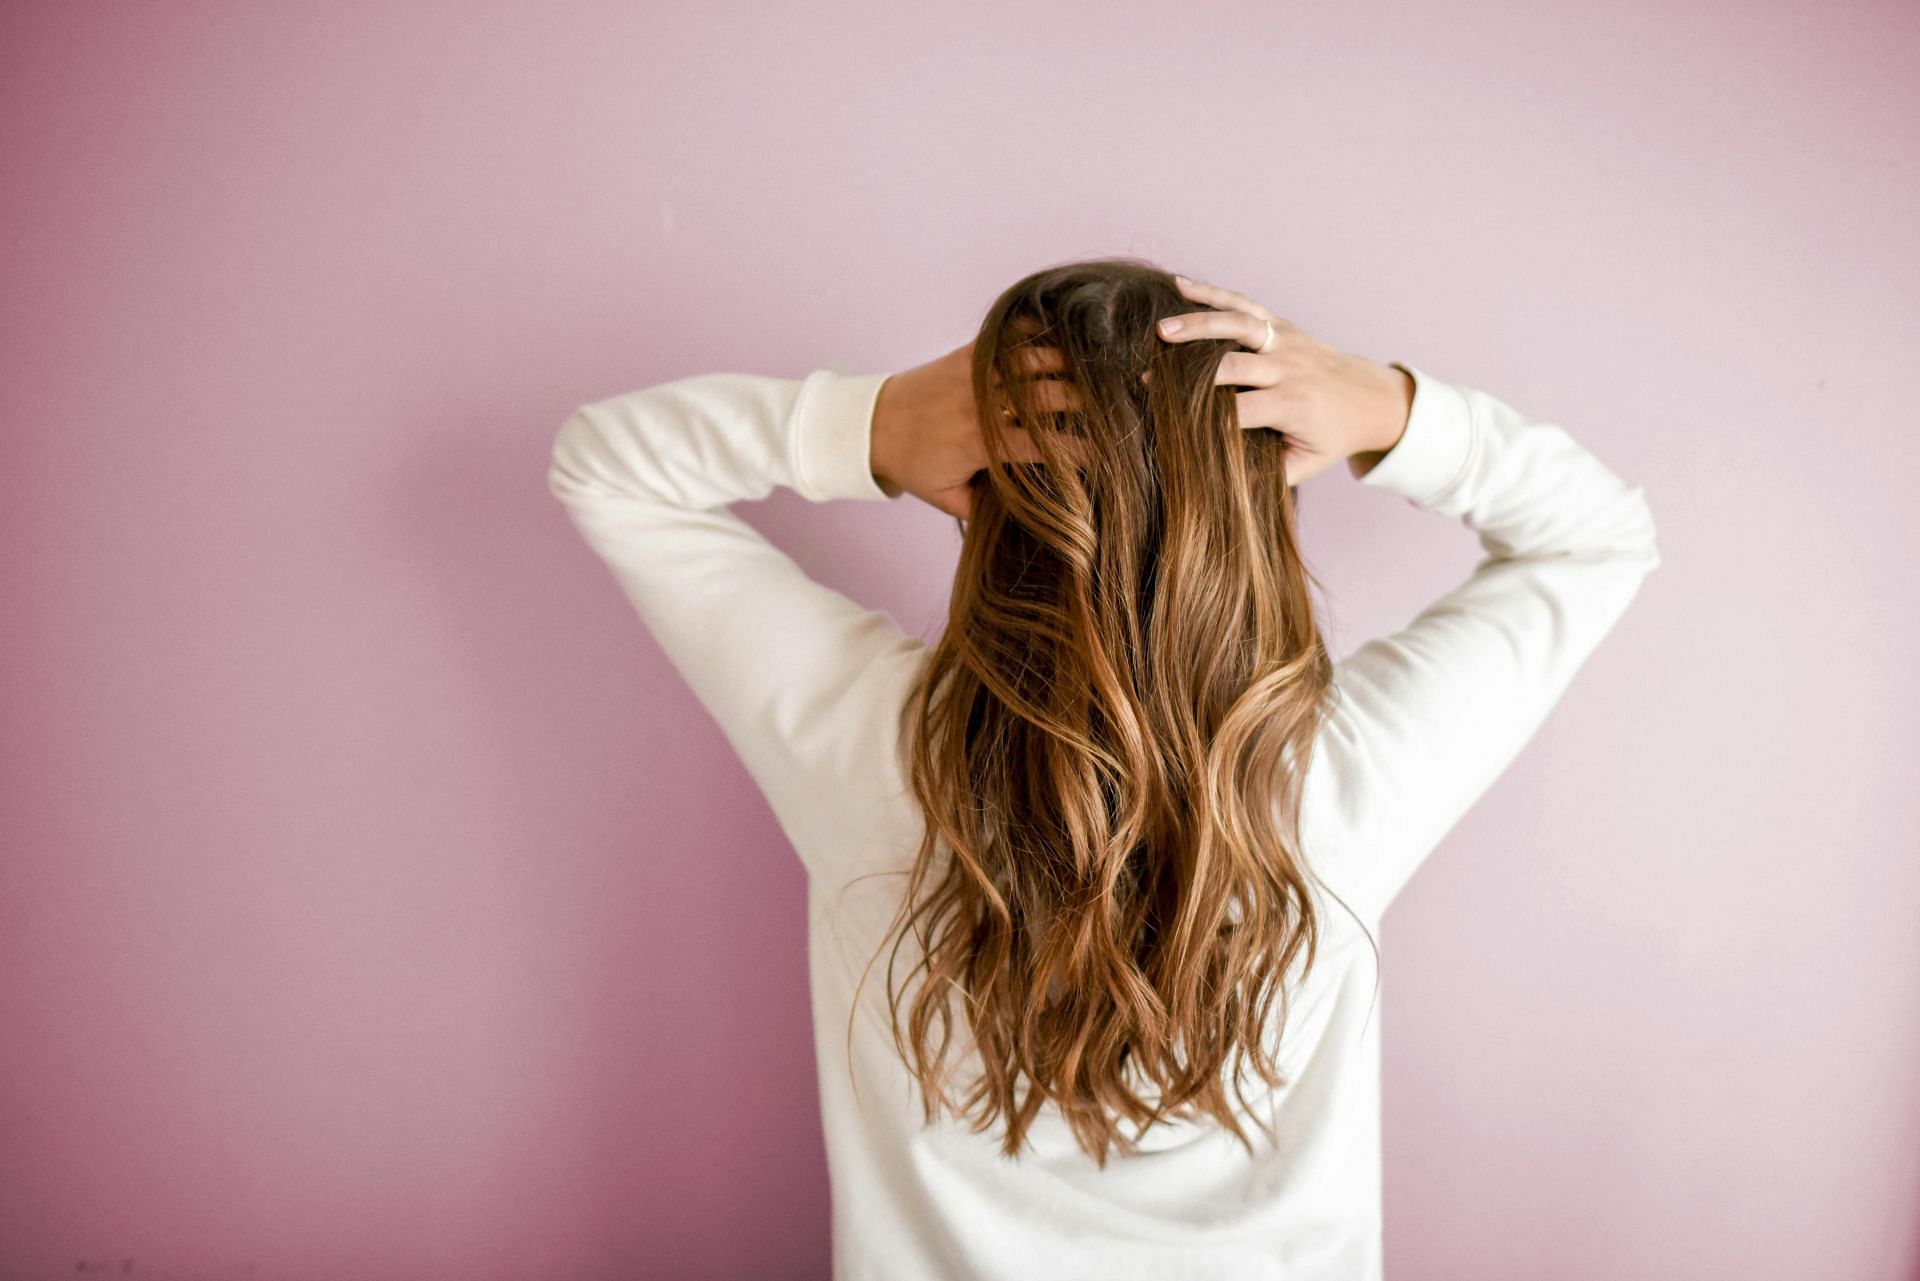 natural remedies for lice (image sourced via Pexels / Photo by element)